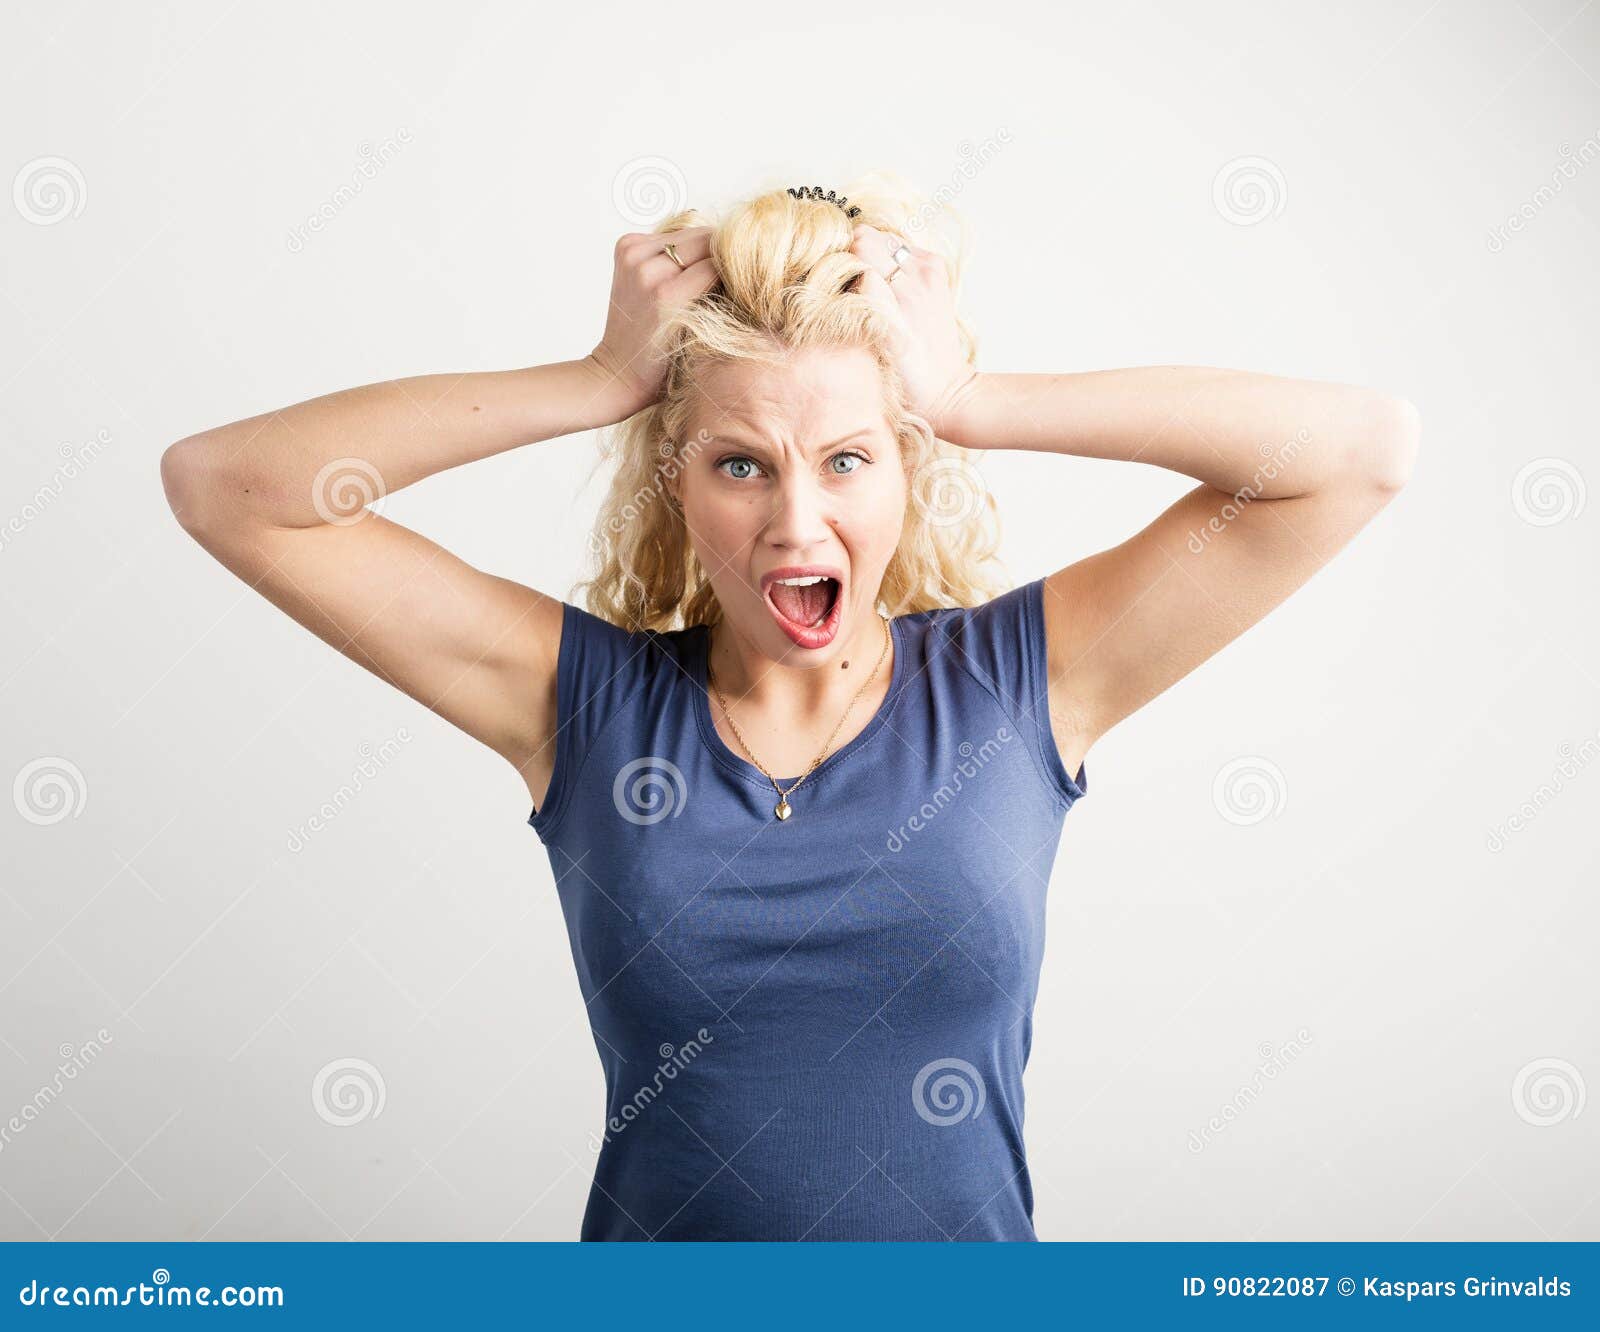 woman pulling her hair out